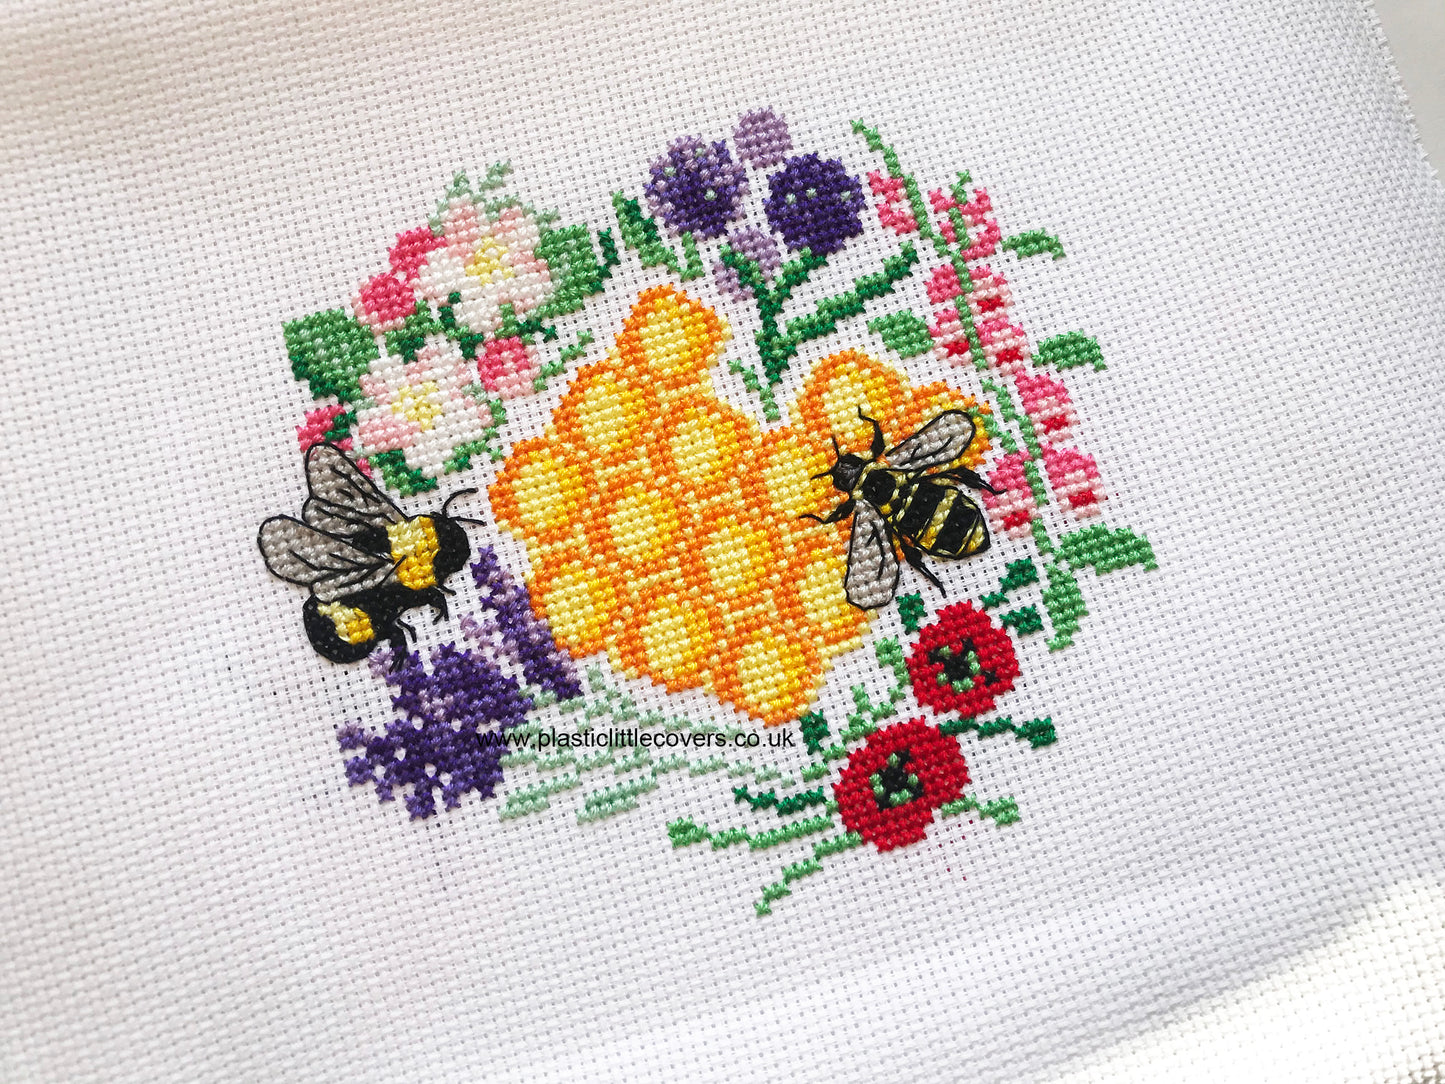 Bees and Blooms - Cross Stitch Pattern PDF.